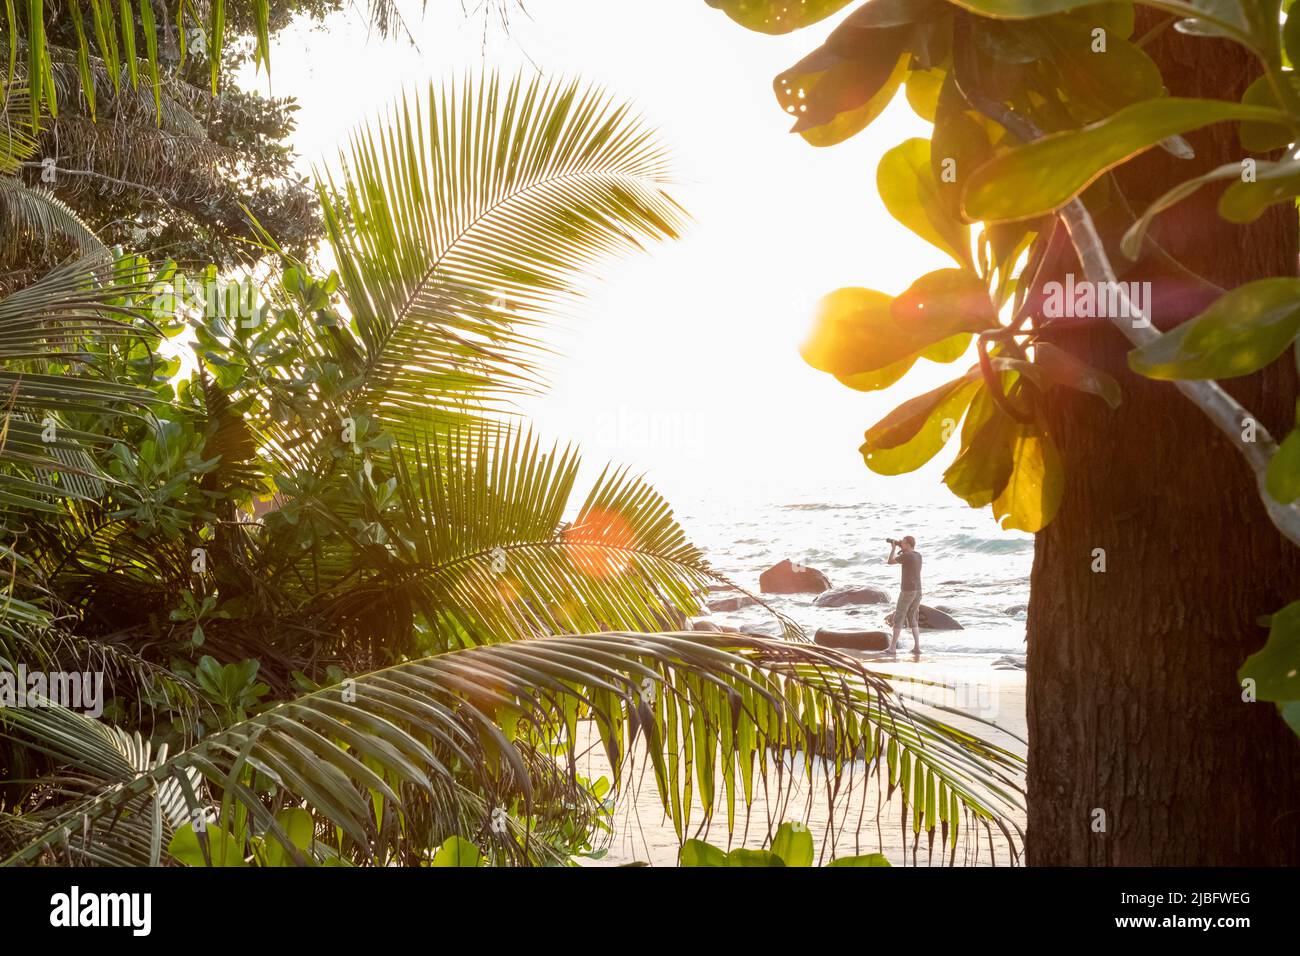 Palm tree and man with camera on beach at sunset Stock Photo